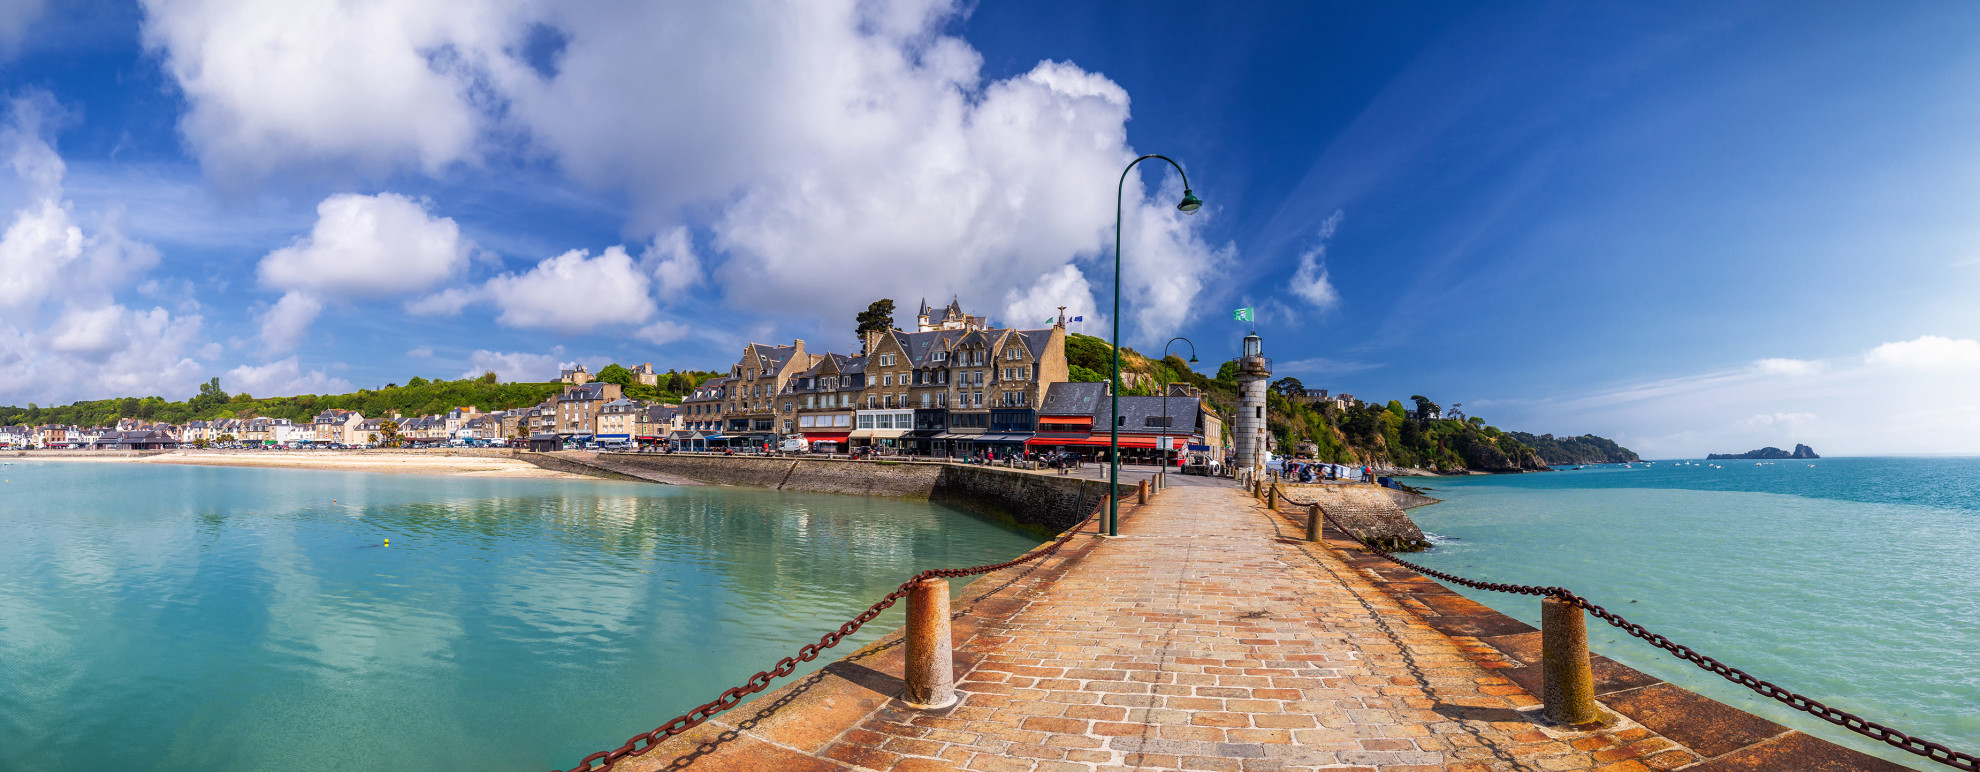 Panoramic view of Cancale, Brittany